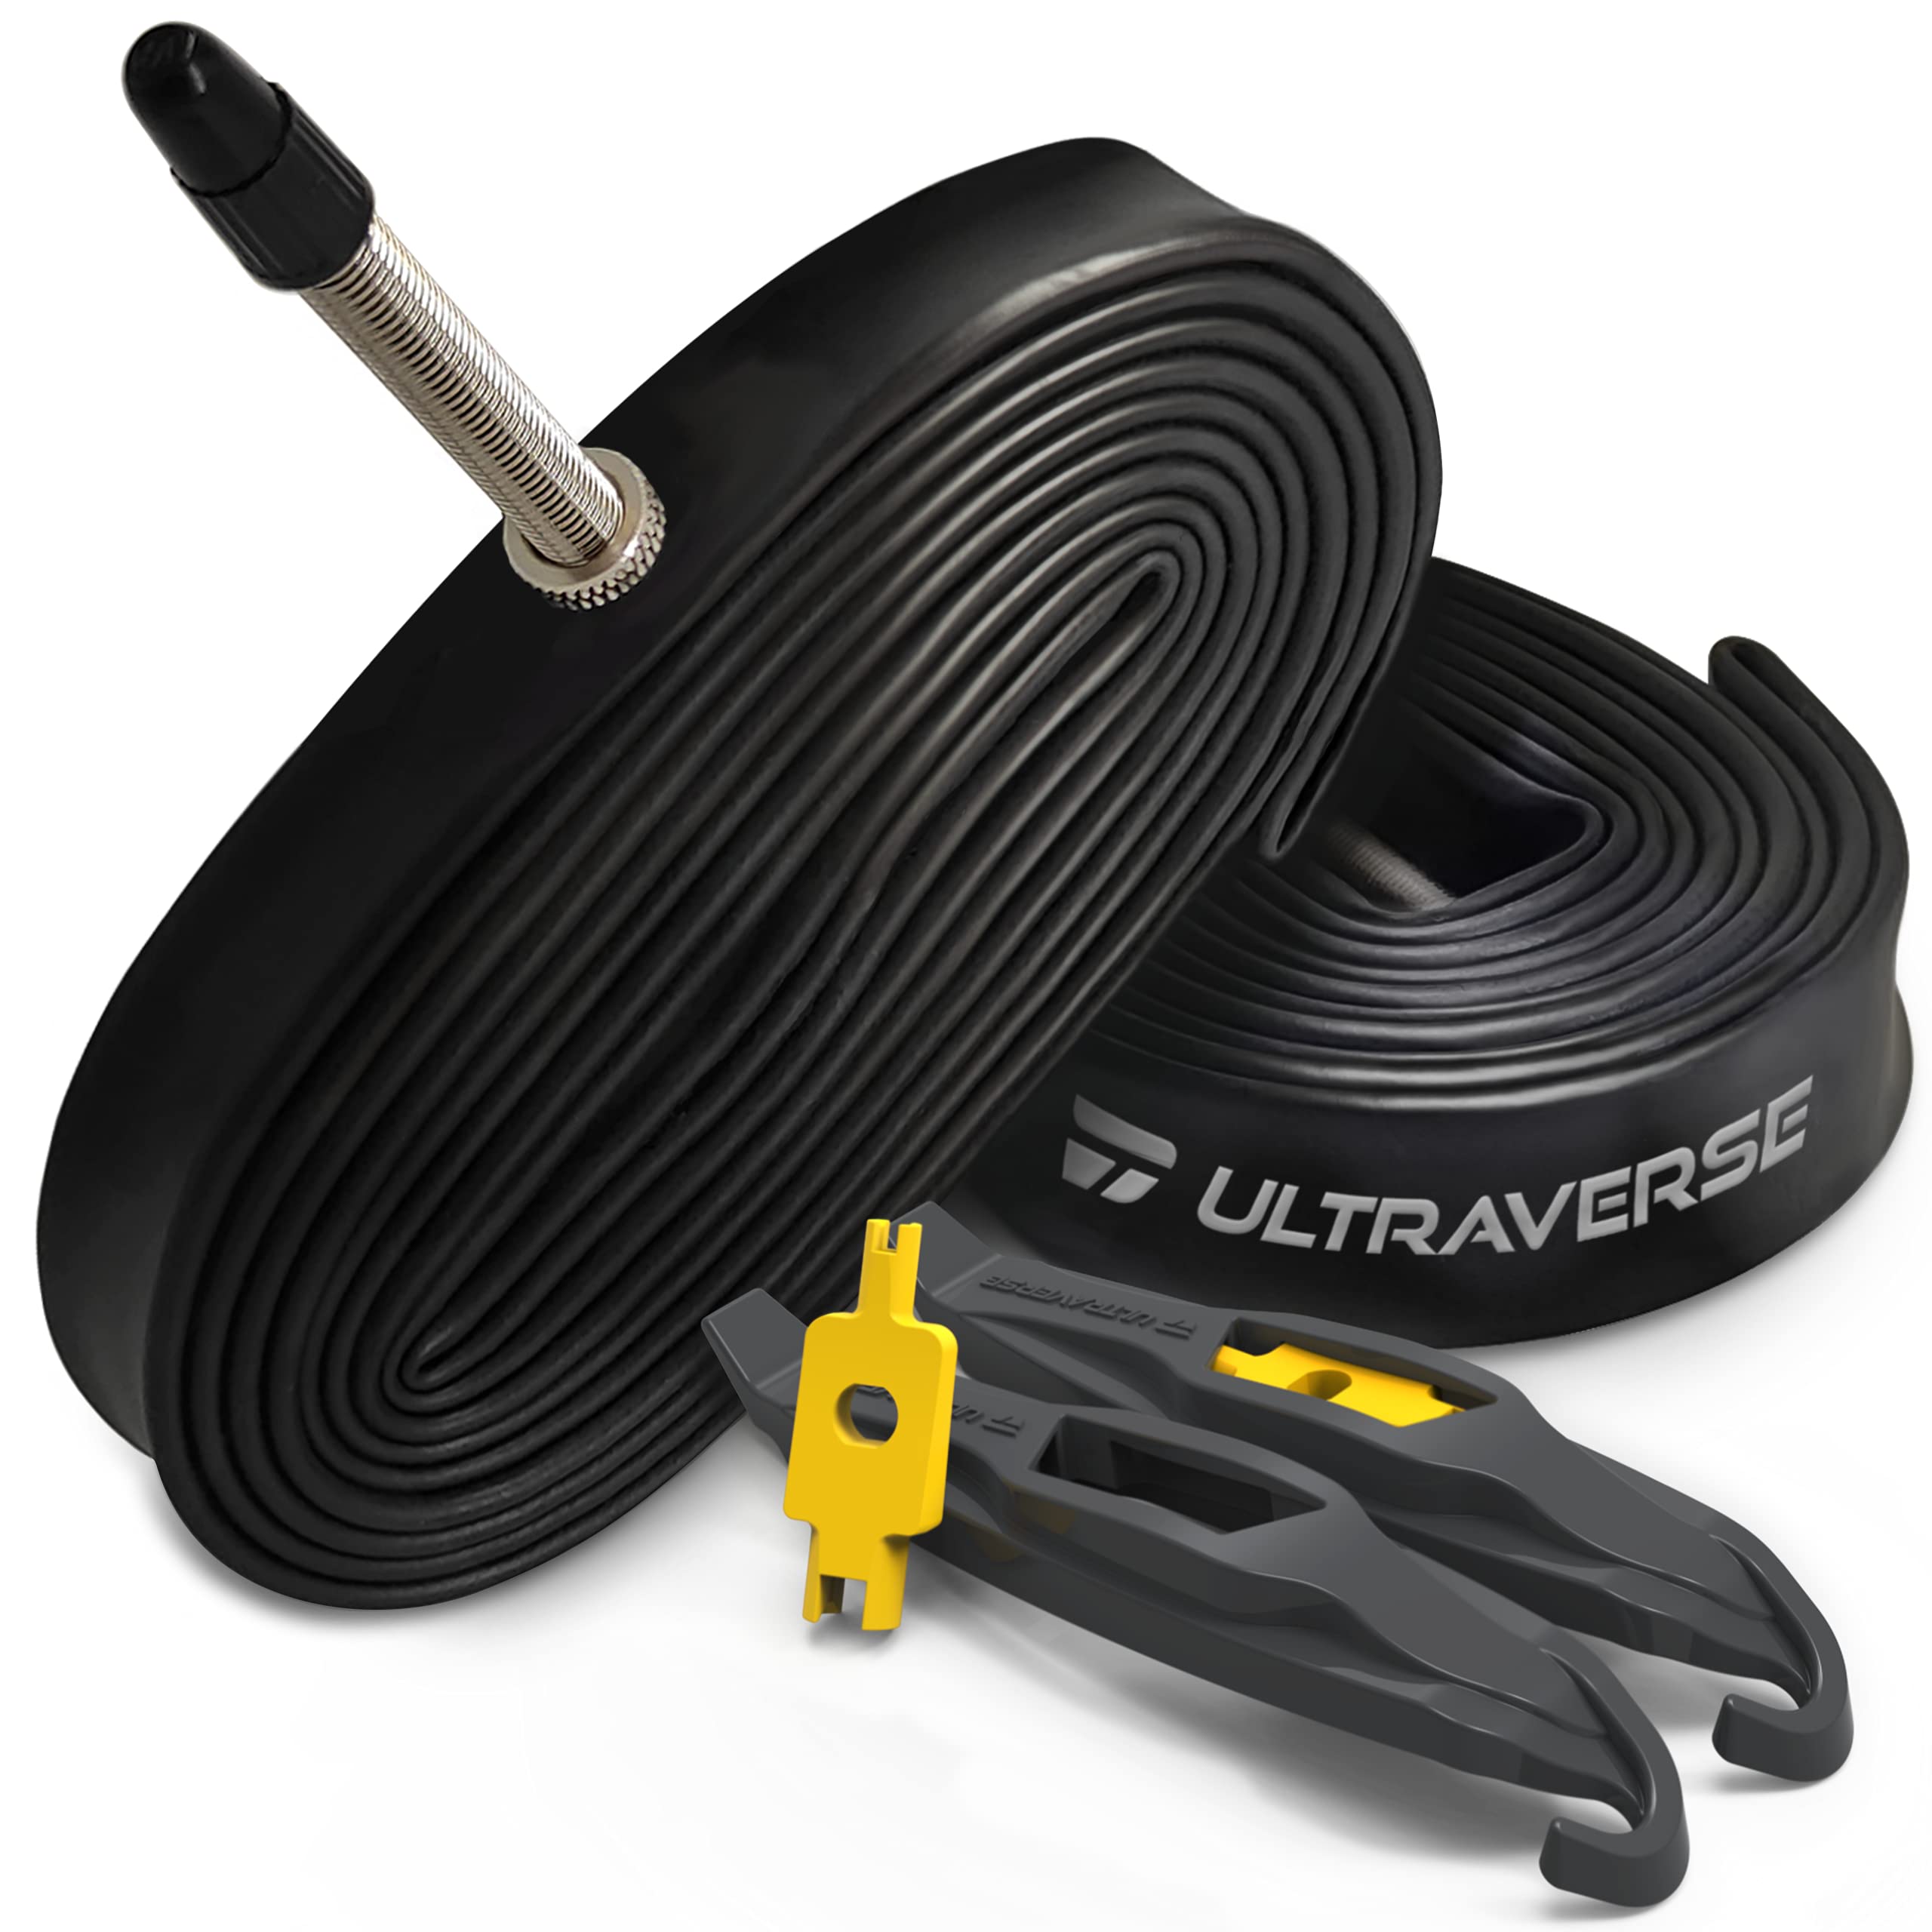 Ultraverse Bike Inner Tube for 700x23-25c, 700x35-43c, 28 inch Bicycle  Wheel Sizes with 48mm Presta Valve - Butyl Rubber Tubes for Road and Gravel  Bikes - 2 Tubes with 2 tire levers